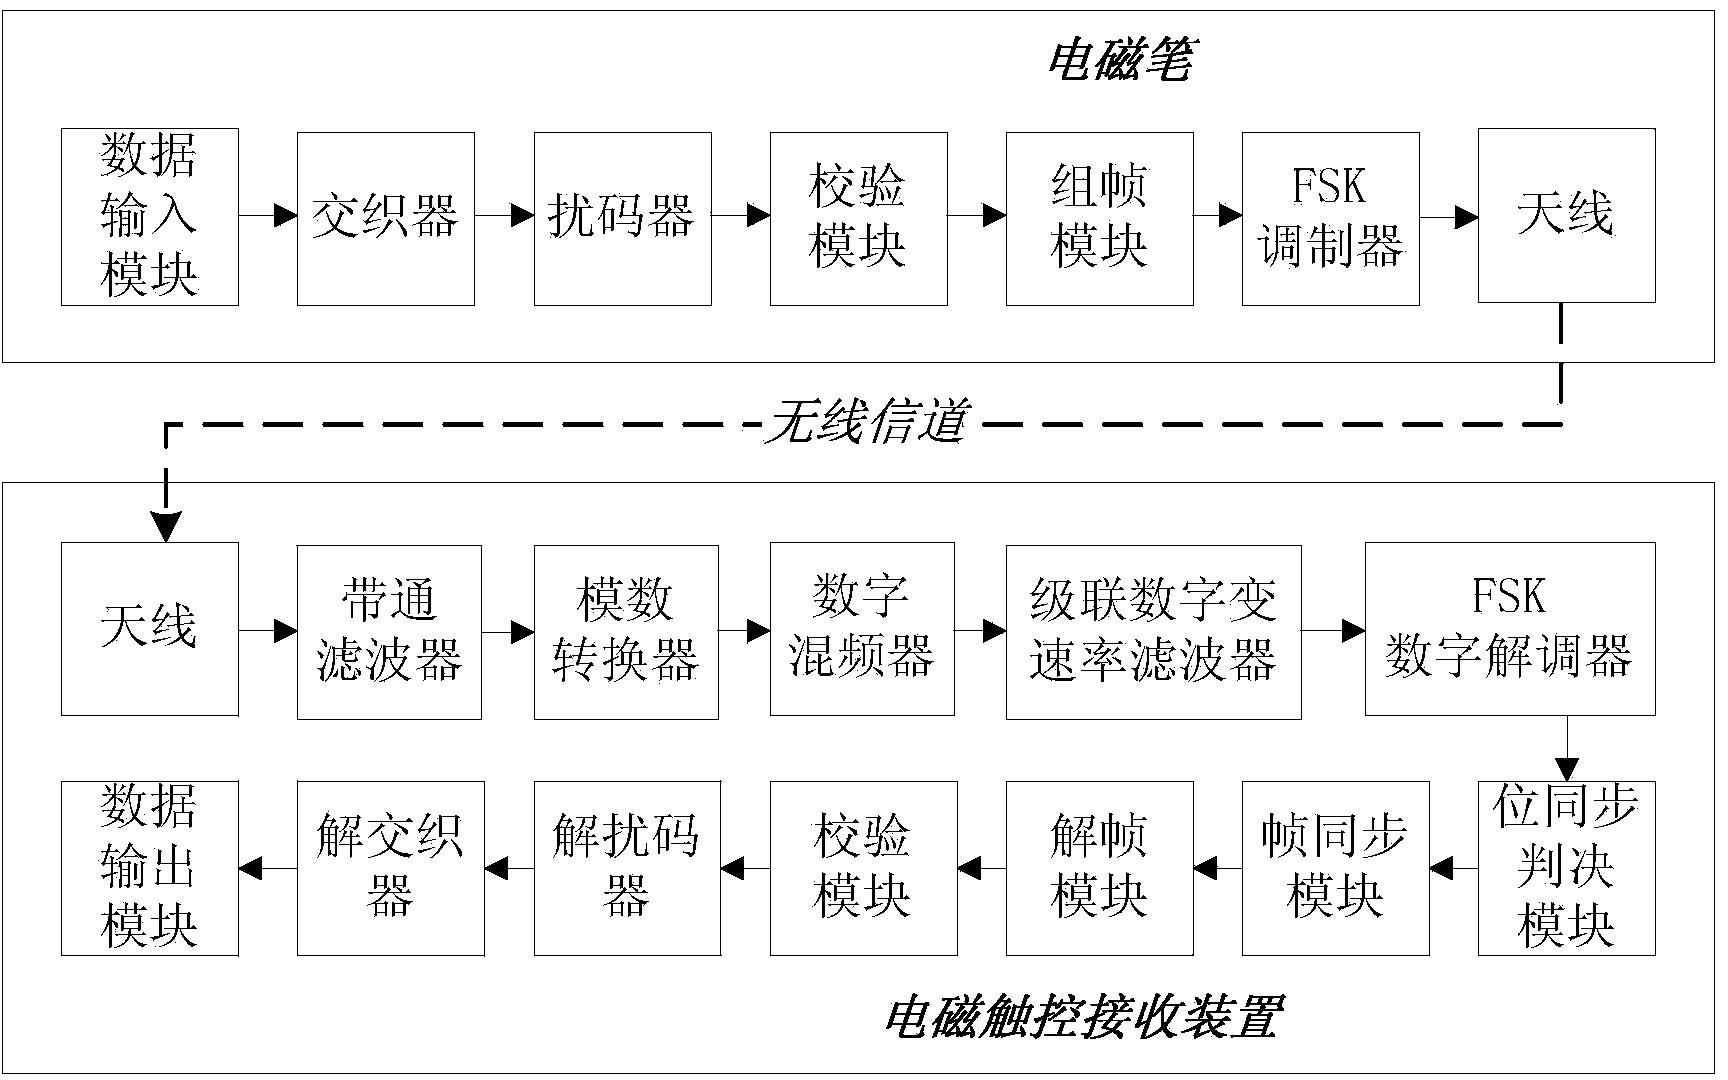 Electromagnetic pen, electromagnetic touch receiving device and wireless communication system composed of electromagnetic pen and electromagnetic touch receiving device